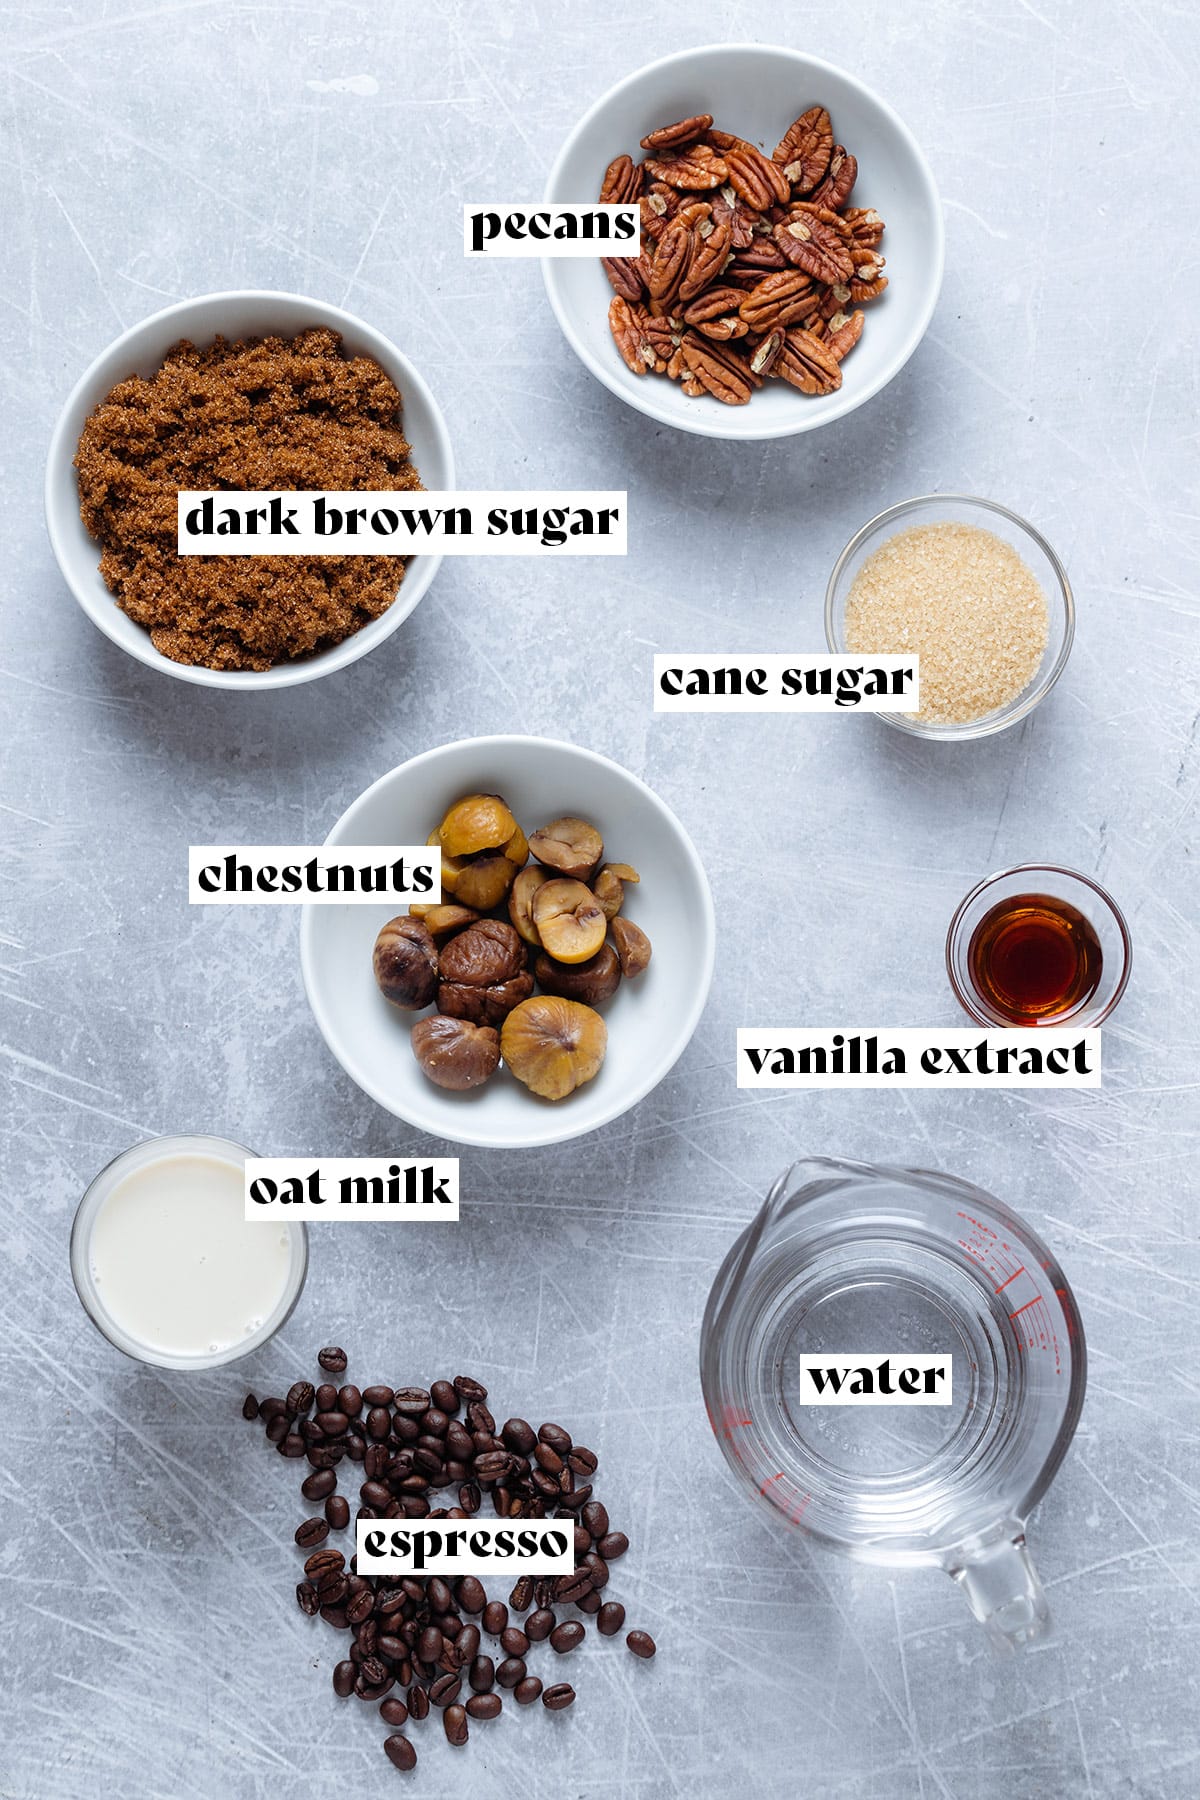 Ingredients like brown sugar, chestnuts, pecans, and water laid out on a grey background.